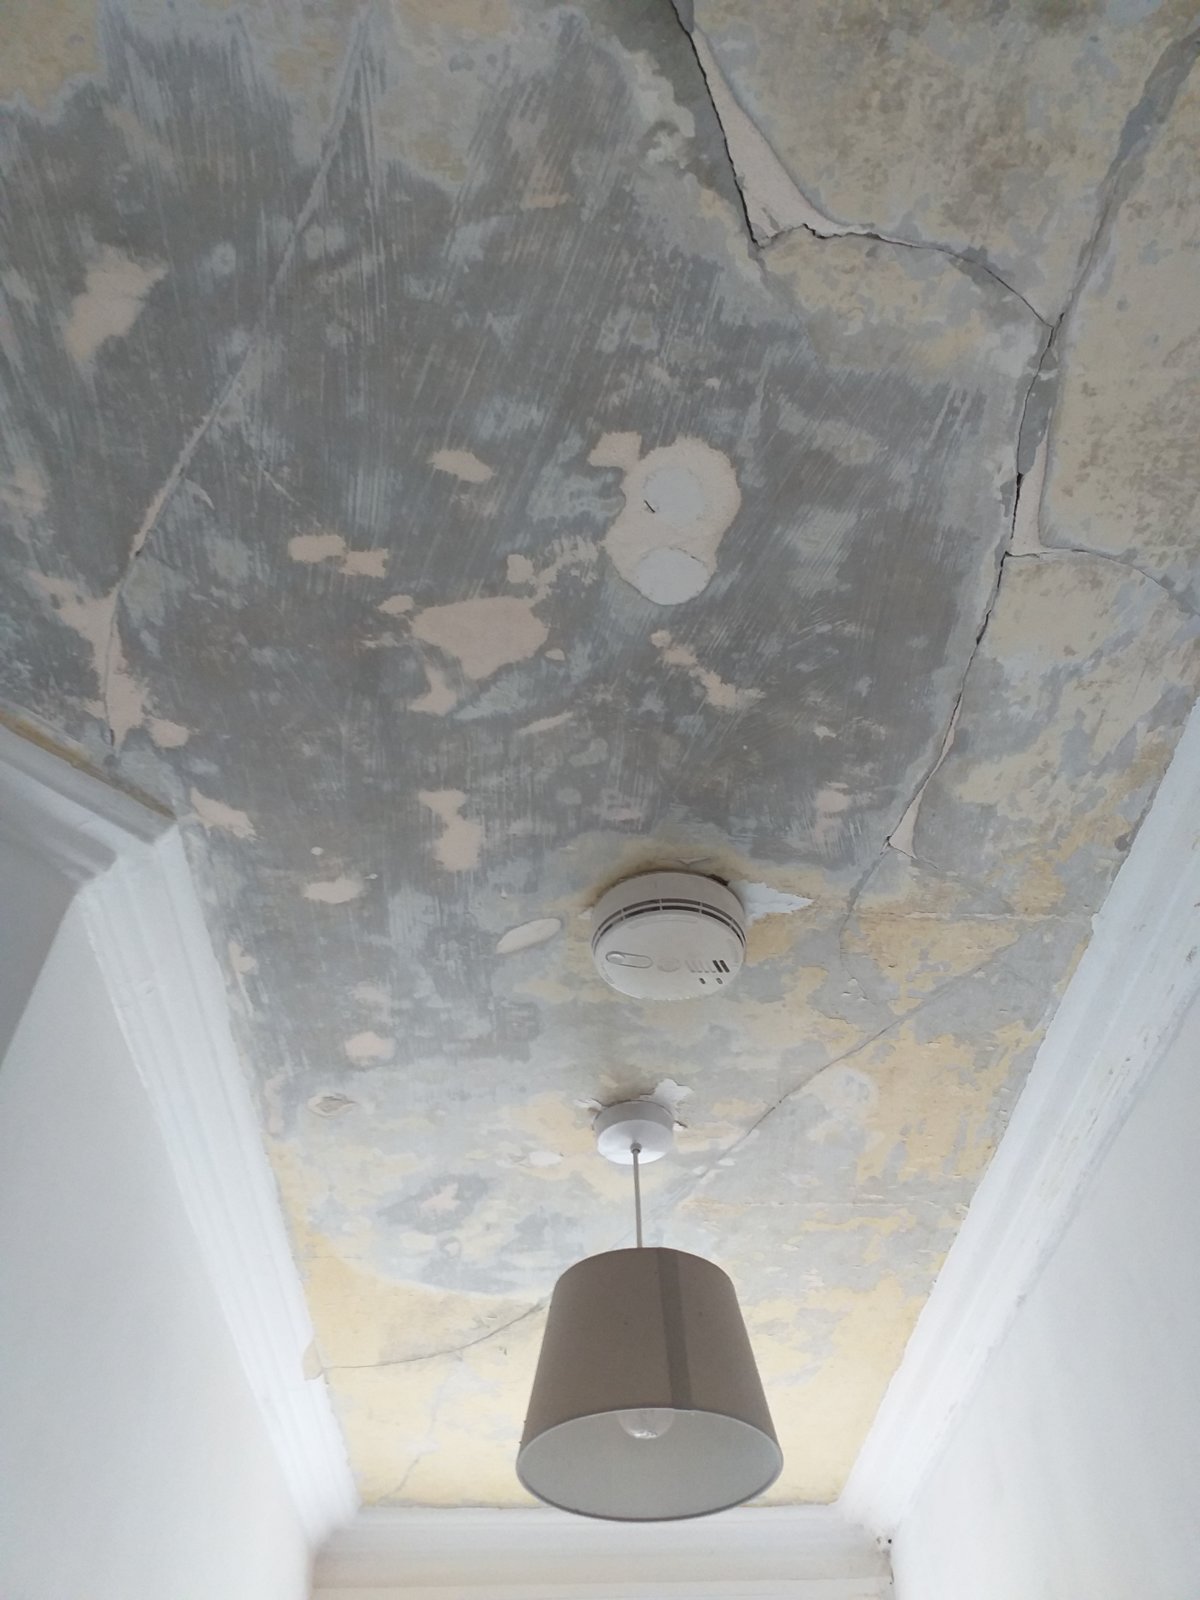 Lath Plaster Ceiling Cornice Repair And Paint In Old